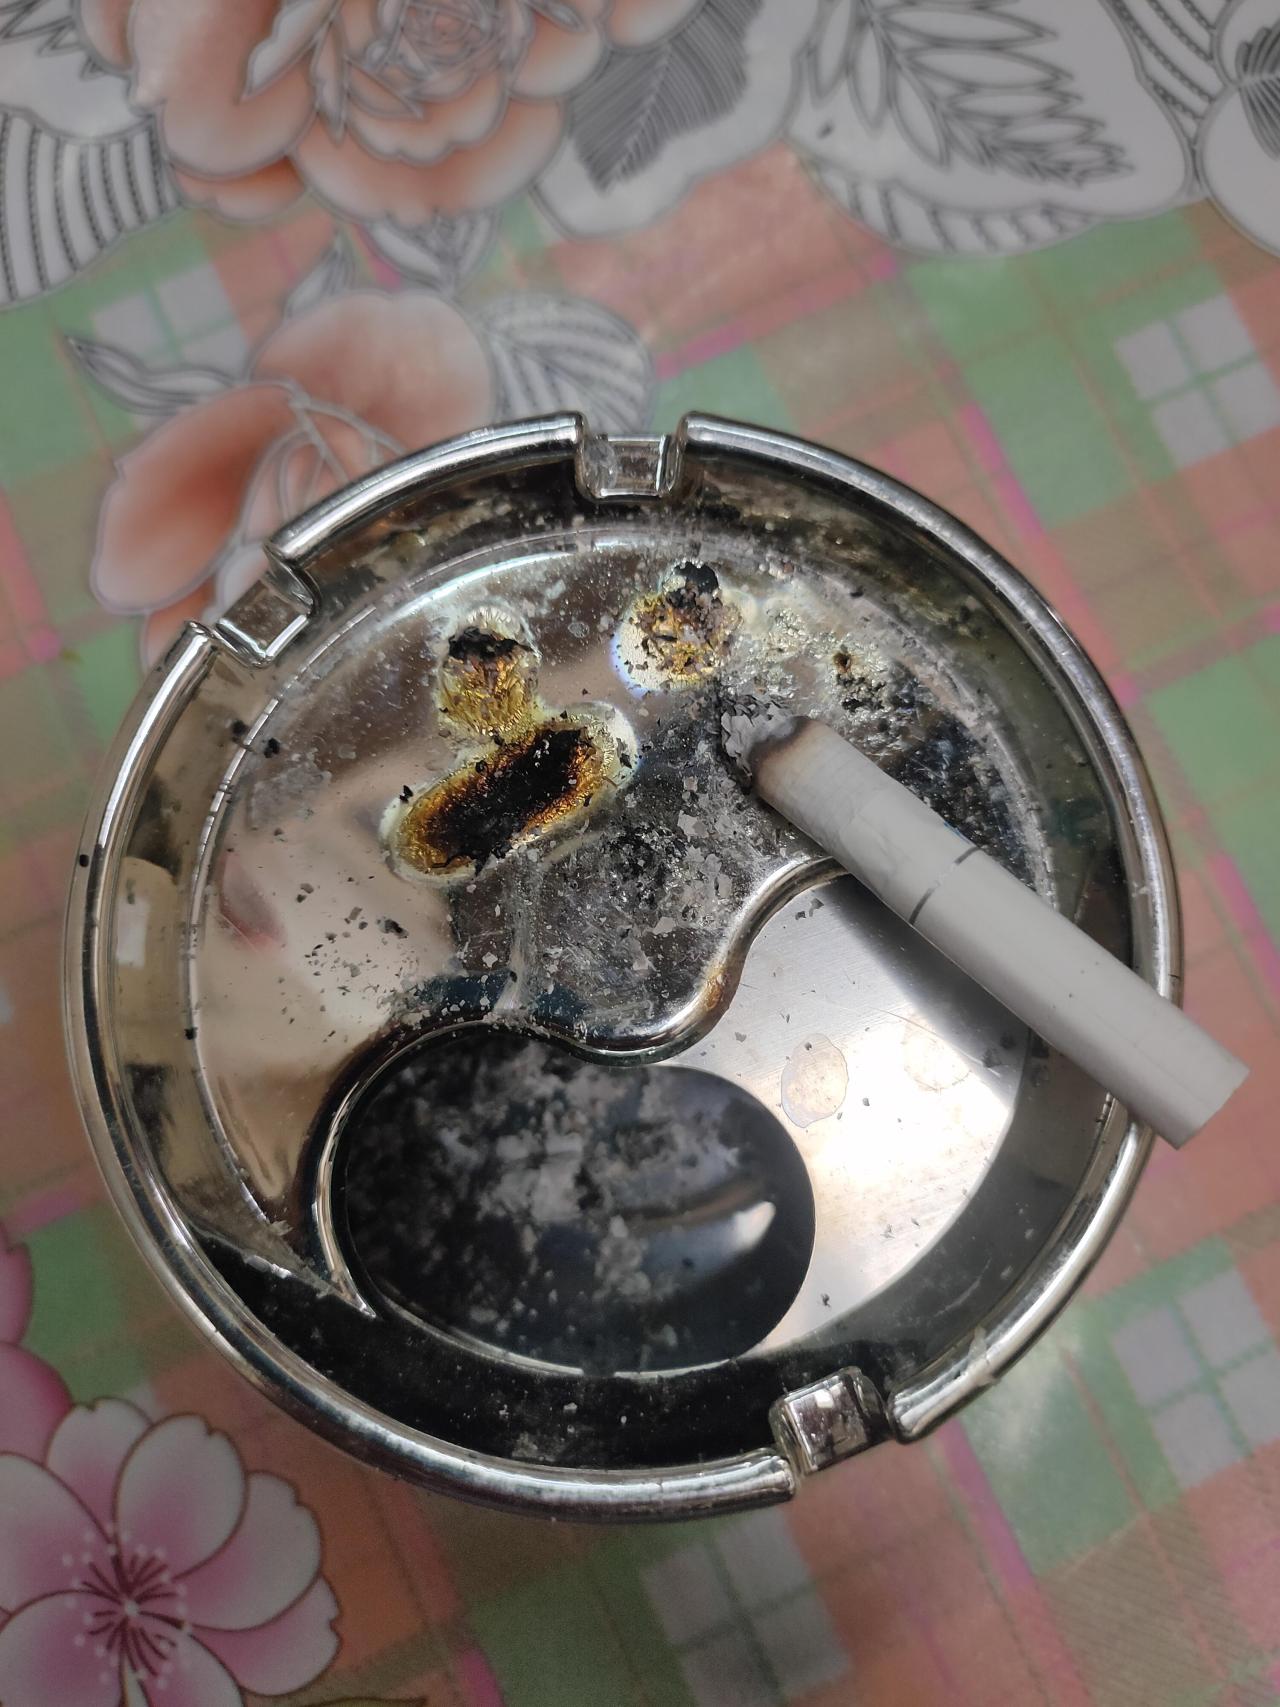 Ash tray made of plastic Source: CrappyDesign #design#LOL#funny